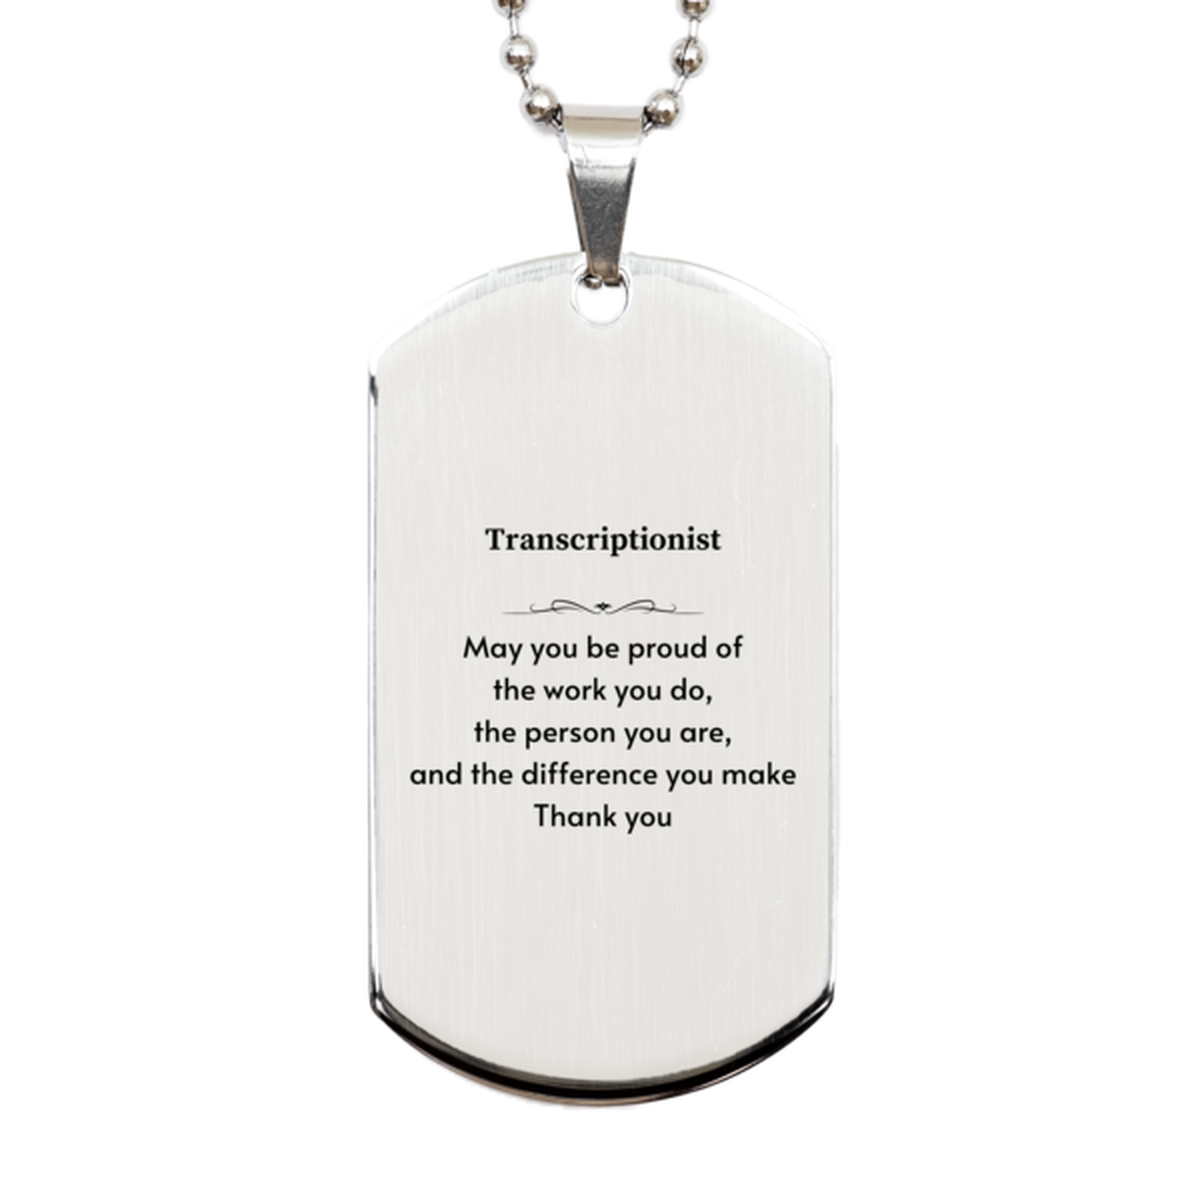 Heartwarming Silver Dog Tag Retirement Coworkers Gifts for Transcriptionist, Transcriptionist May You be proud of the work you do, the person you are Gifts for Boss Men Women Friends